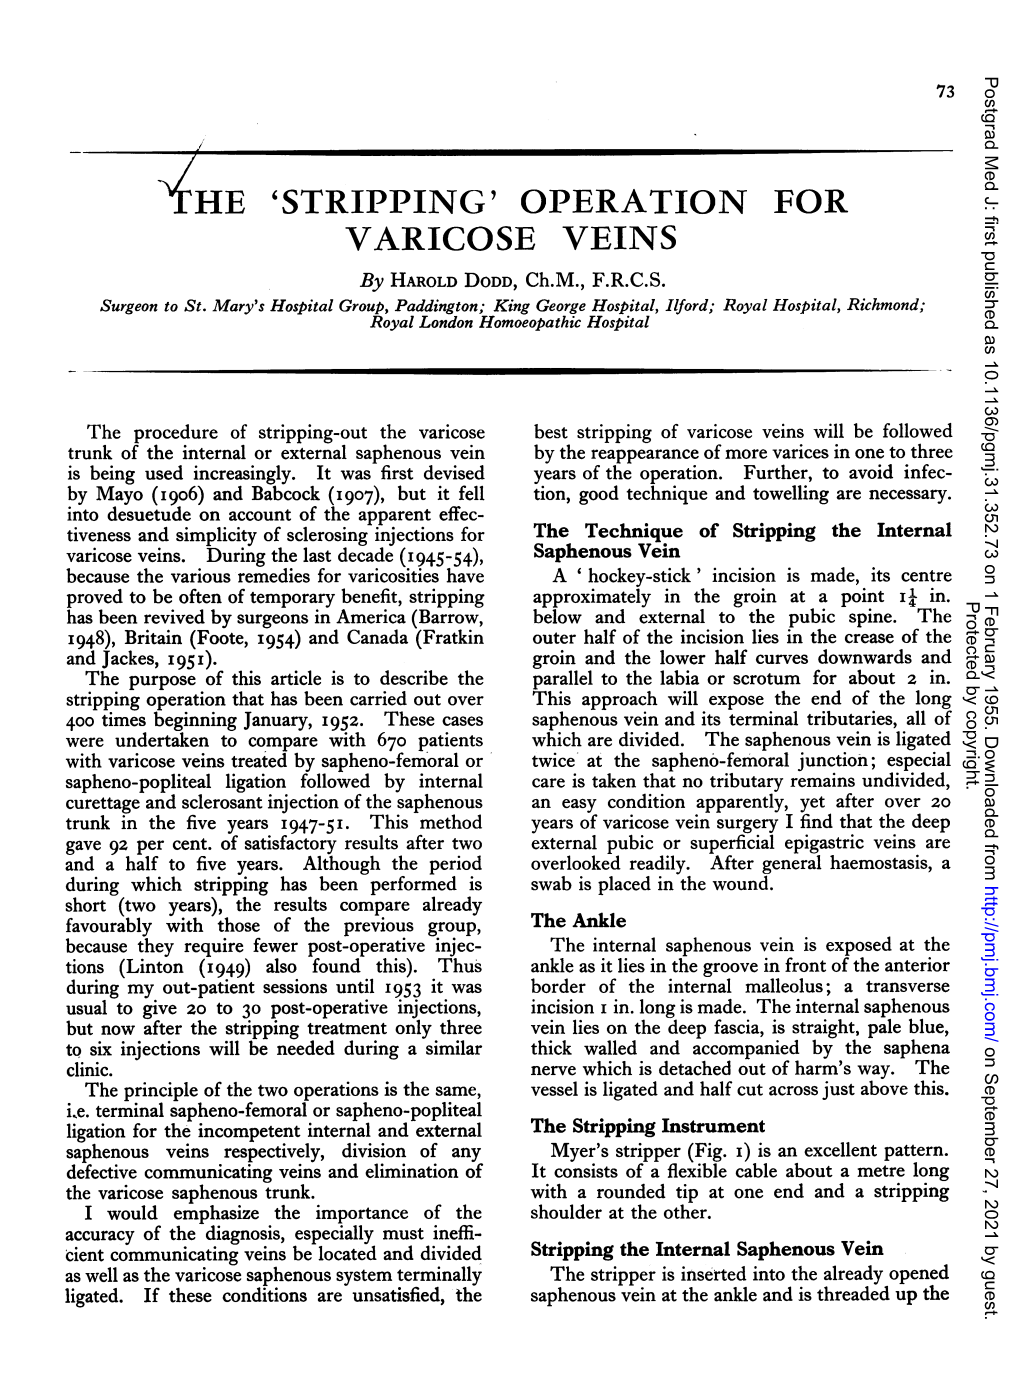 'STRIPPING' OPERATION for VARICOSE VEINS by HAROLD DODD, Ch.M., F.R.C.S